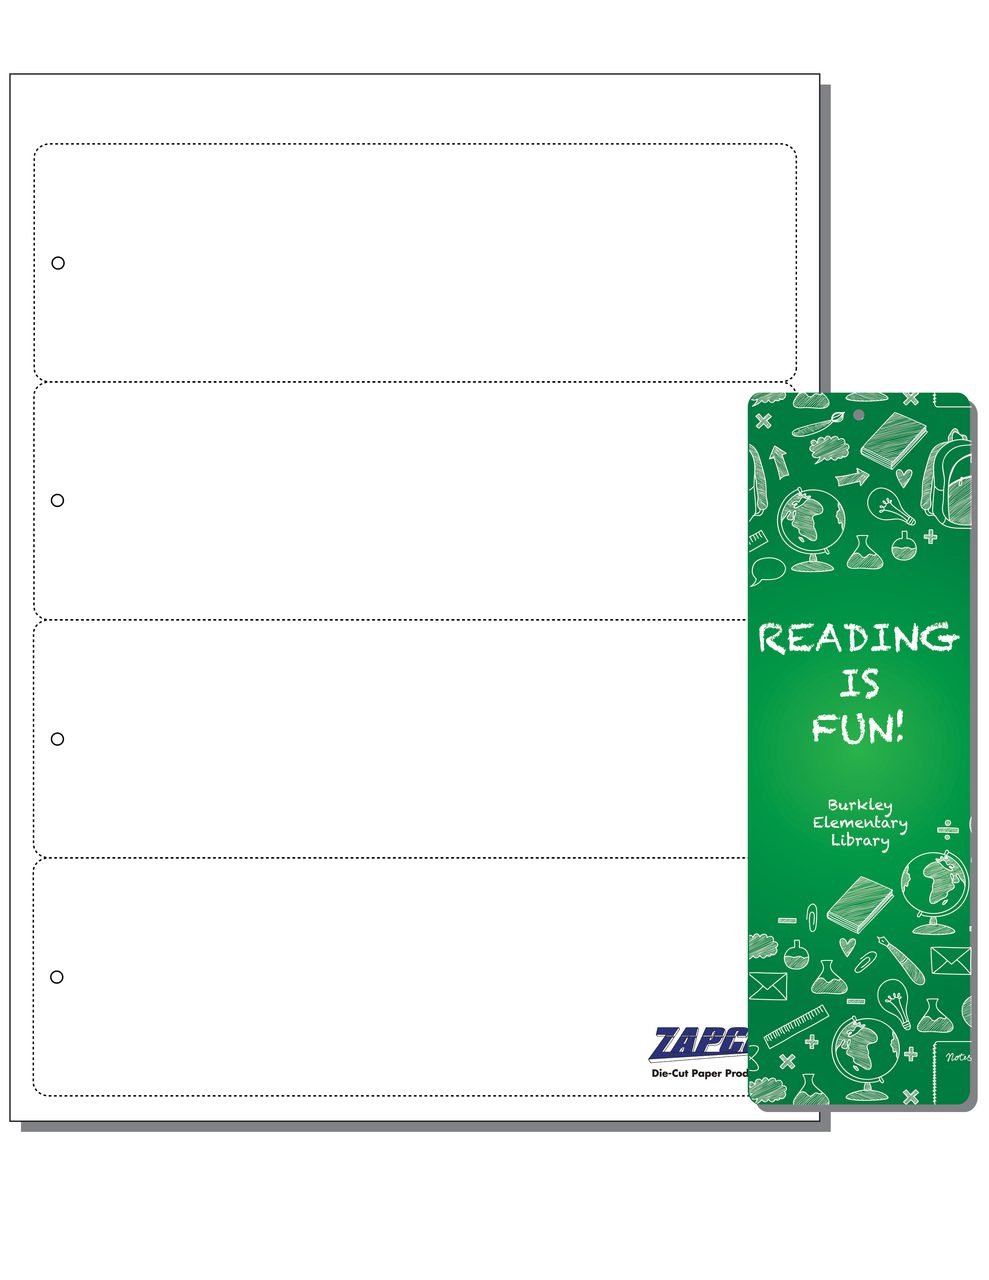 Zapco Print-ready Bookmarks, 2-1/2 x 8, 5-Up Perfed for Separation on White 8-1/2 x 11 65lb Astrobright Cover Paper - 250